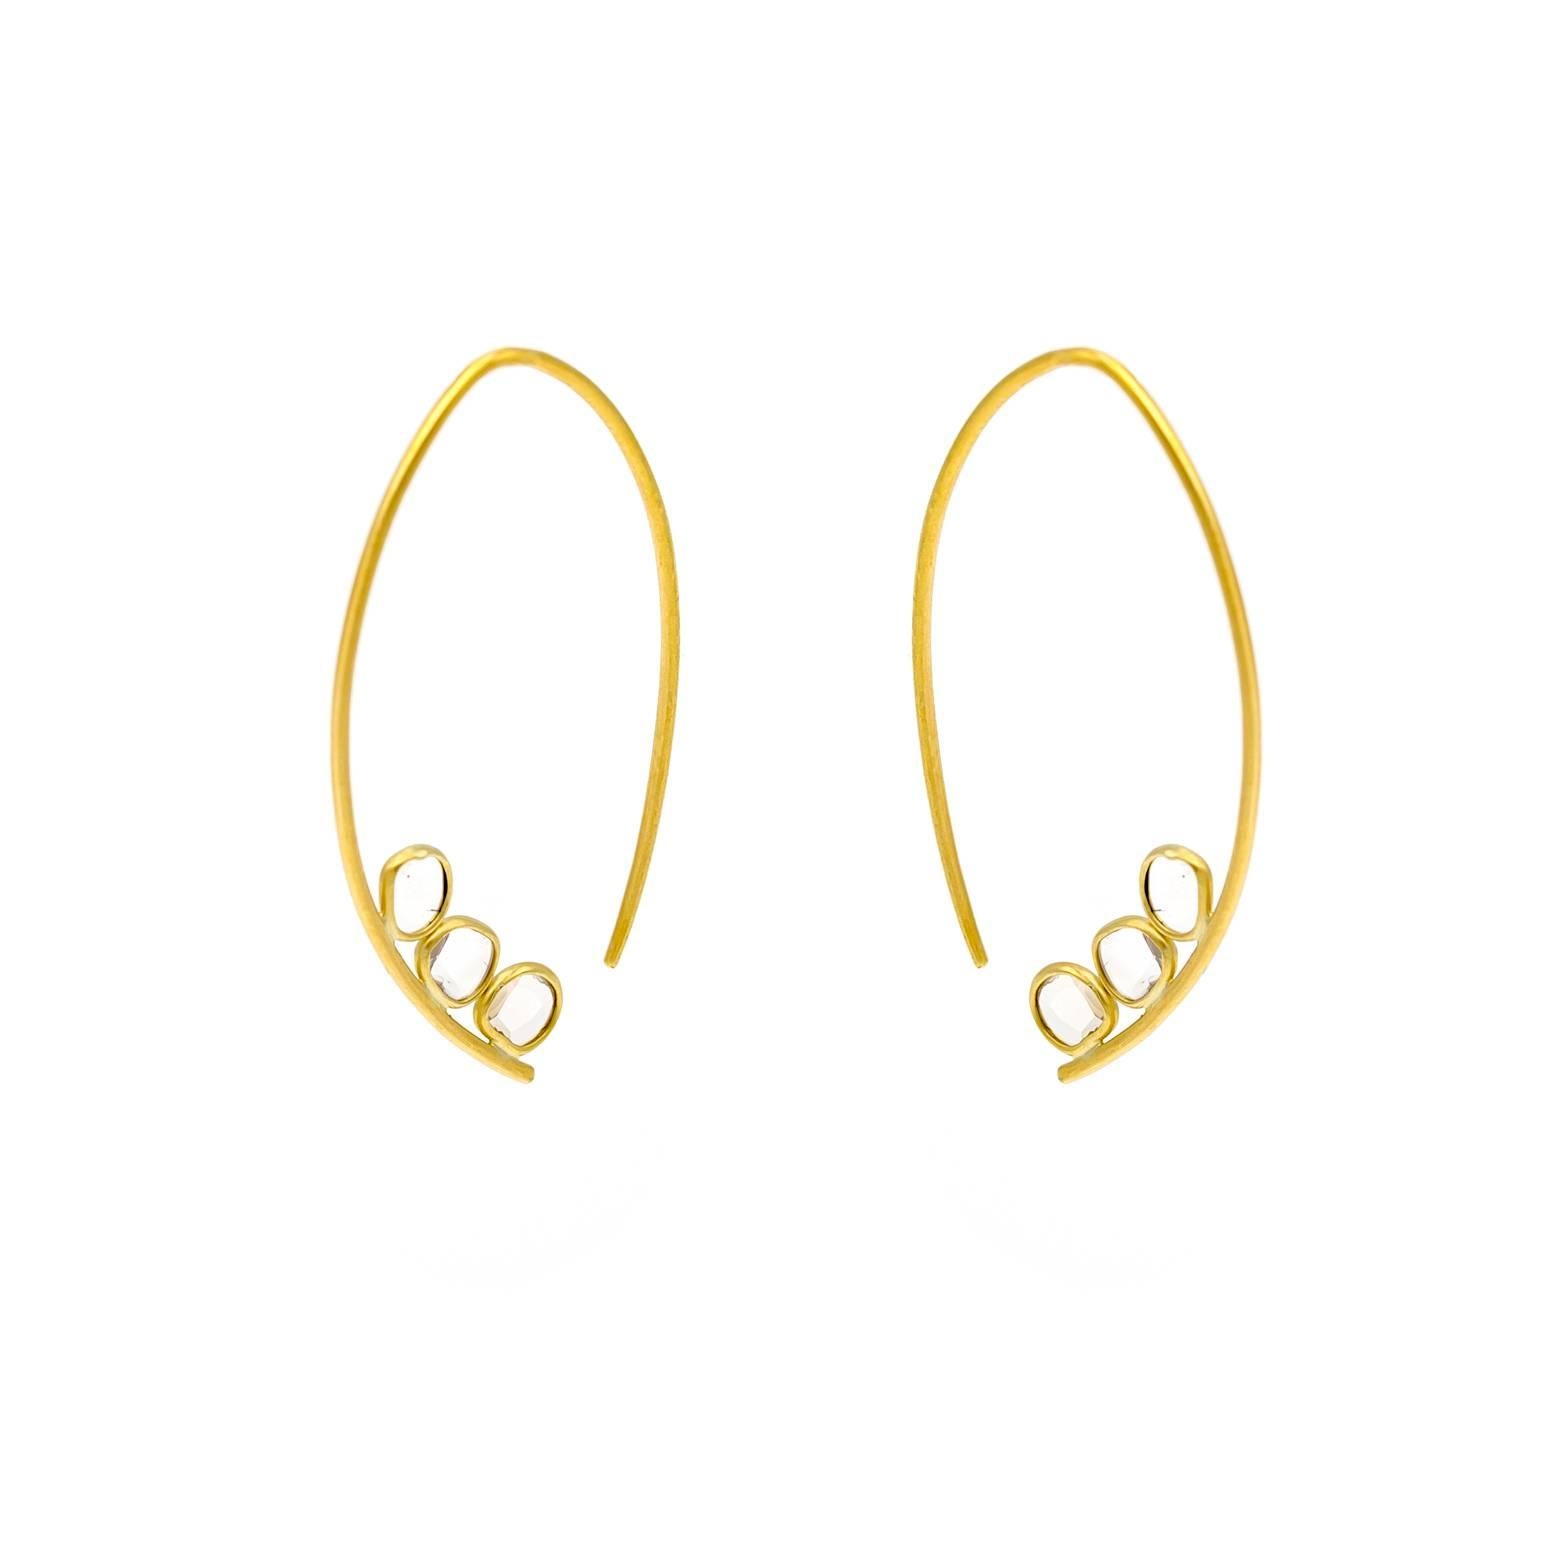 Artistic and chic these satin 18K yellow gold drop earrings are hoop-like with 6 rose cut diamonds that sparkle. Great everyday earrings that can easily dress up any outfit. Beautiful and stylish. 